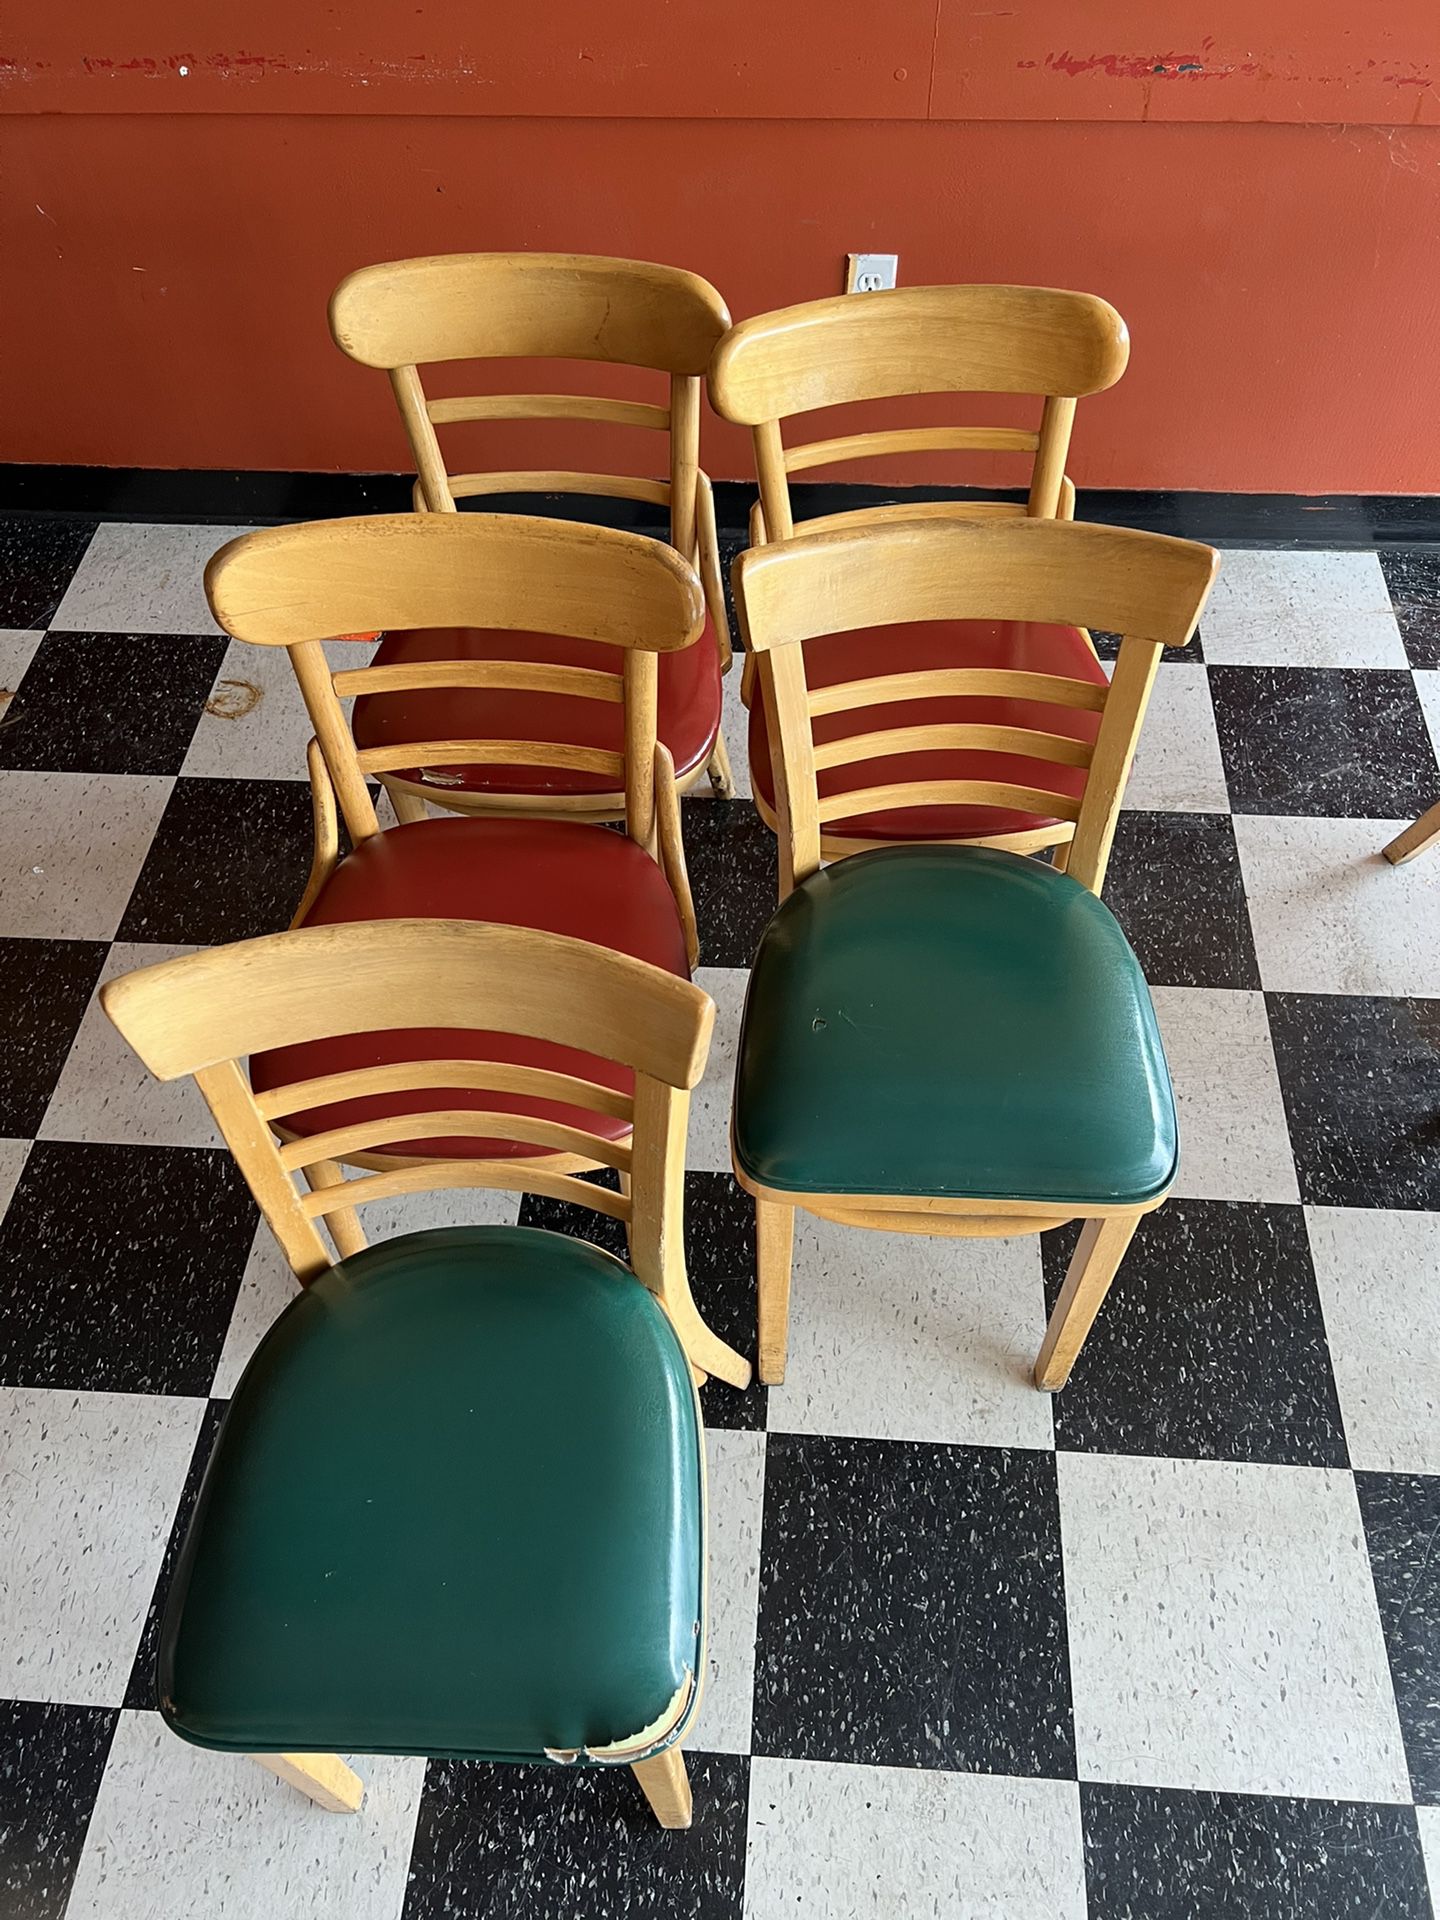 Chairs: 5 Total. 